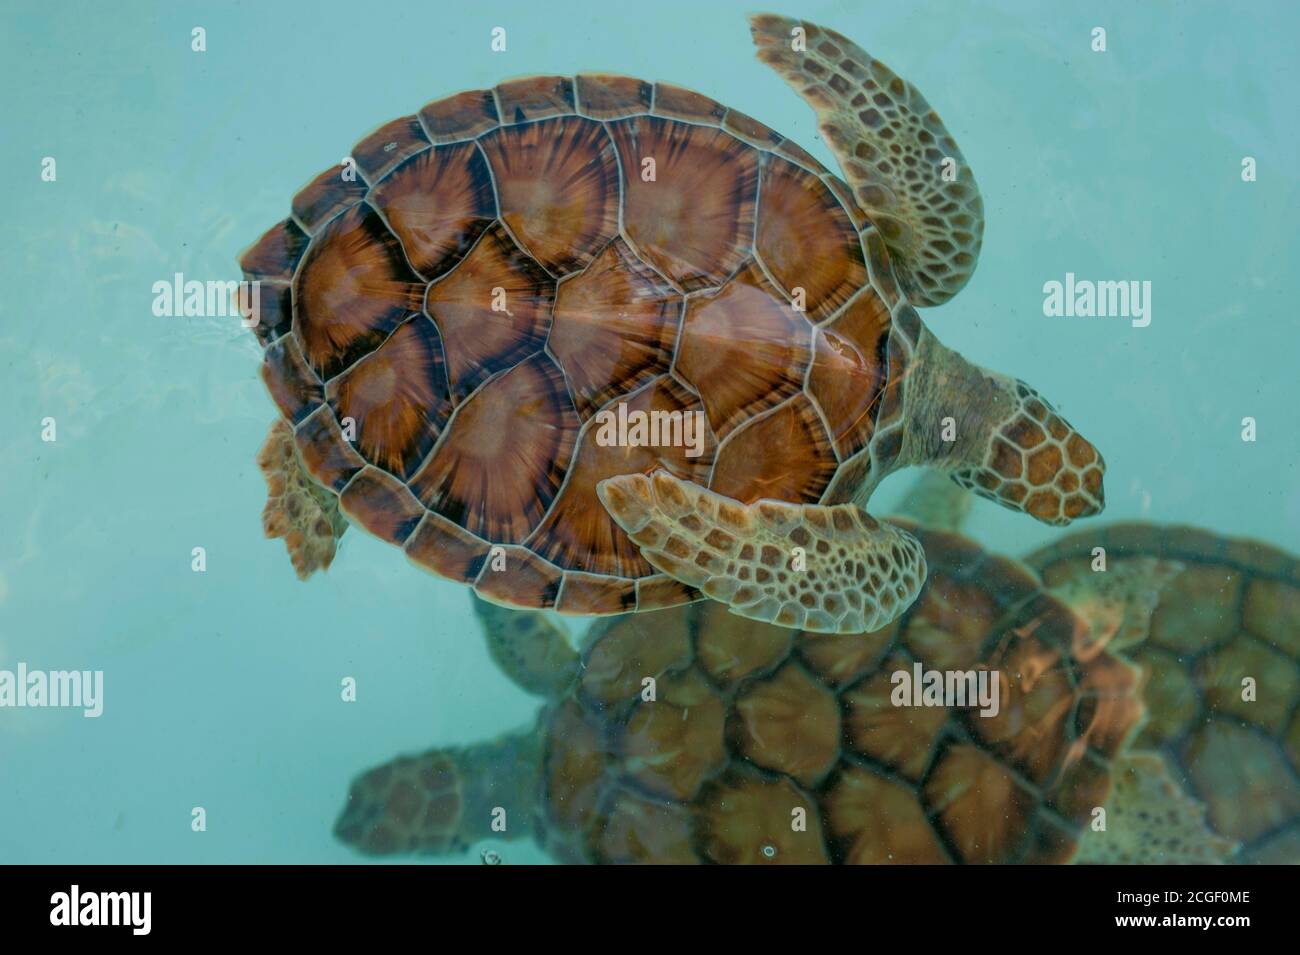 A green turtle (about 6 months old) in the Green Turtle Breeding Program at the Xcaret Eco Theme Park on the Riviera Maya near Cancun in the state of Stock Photo